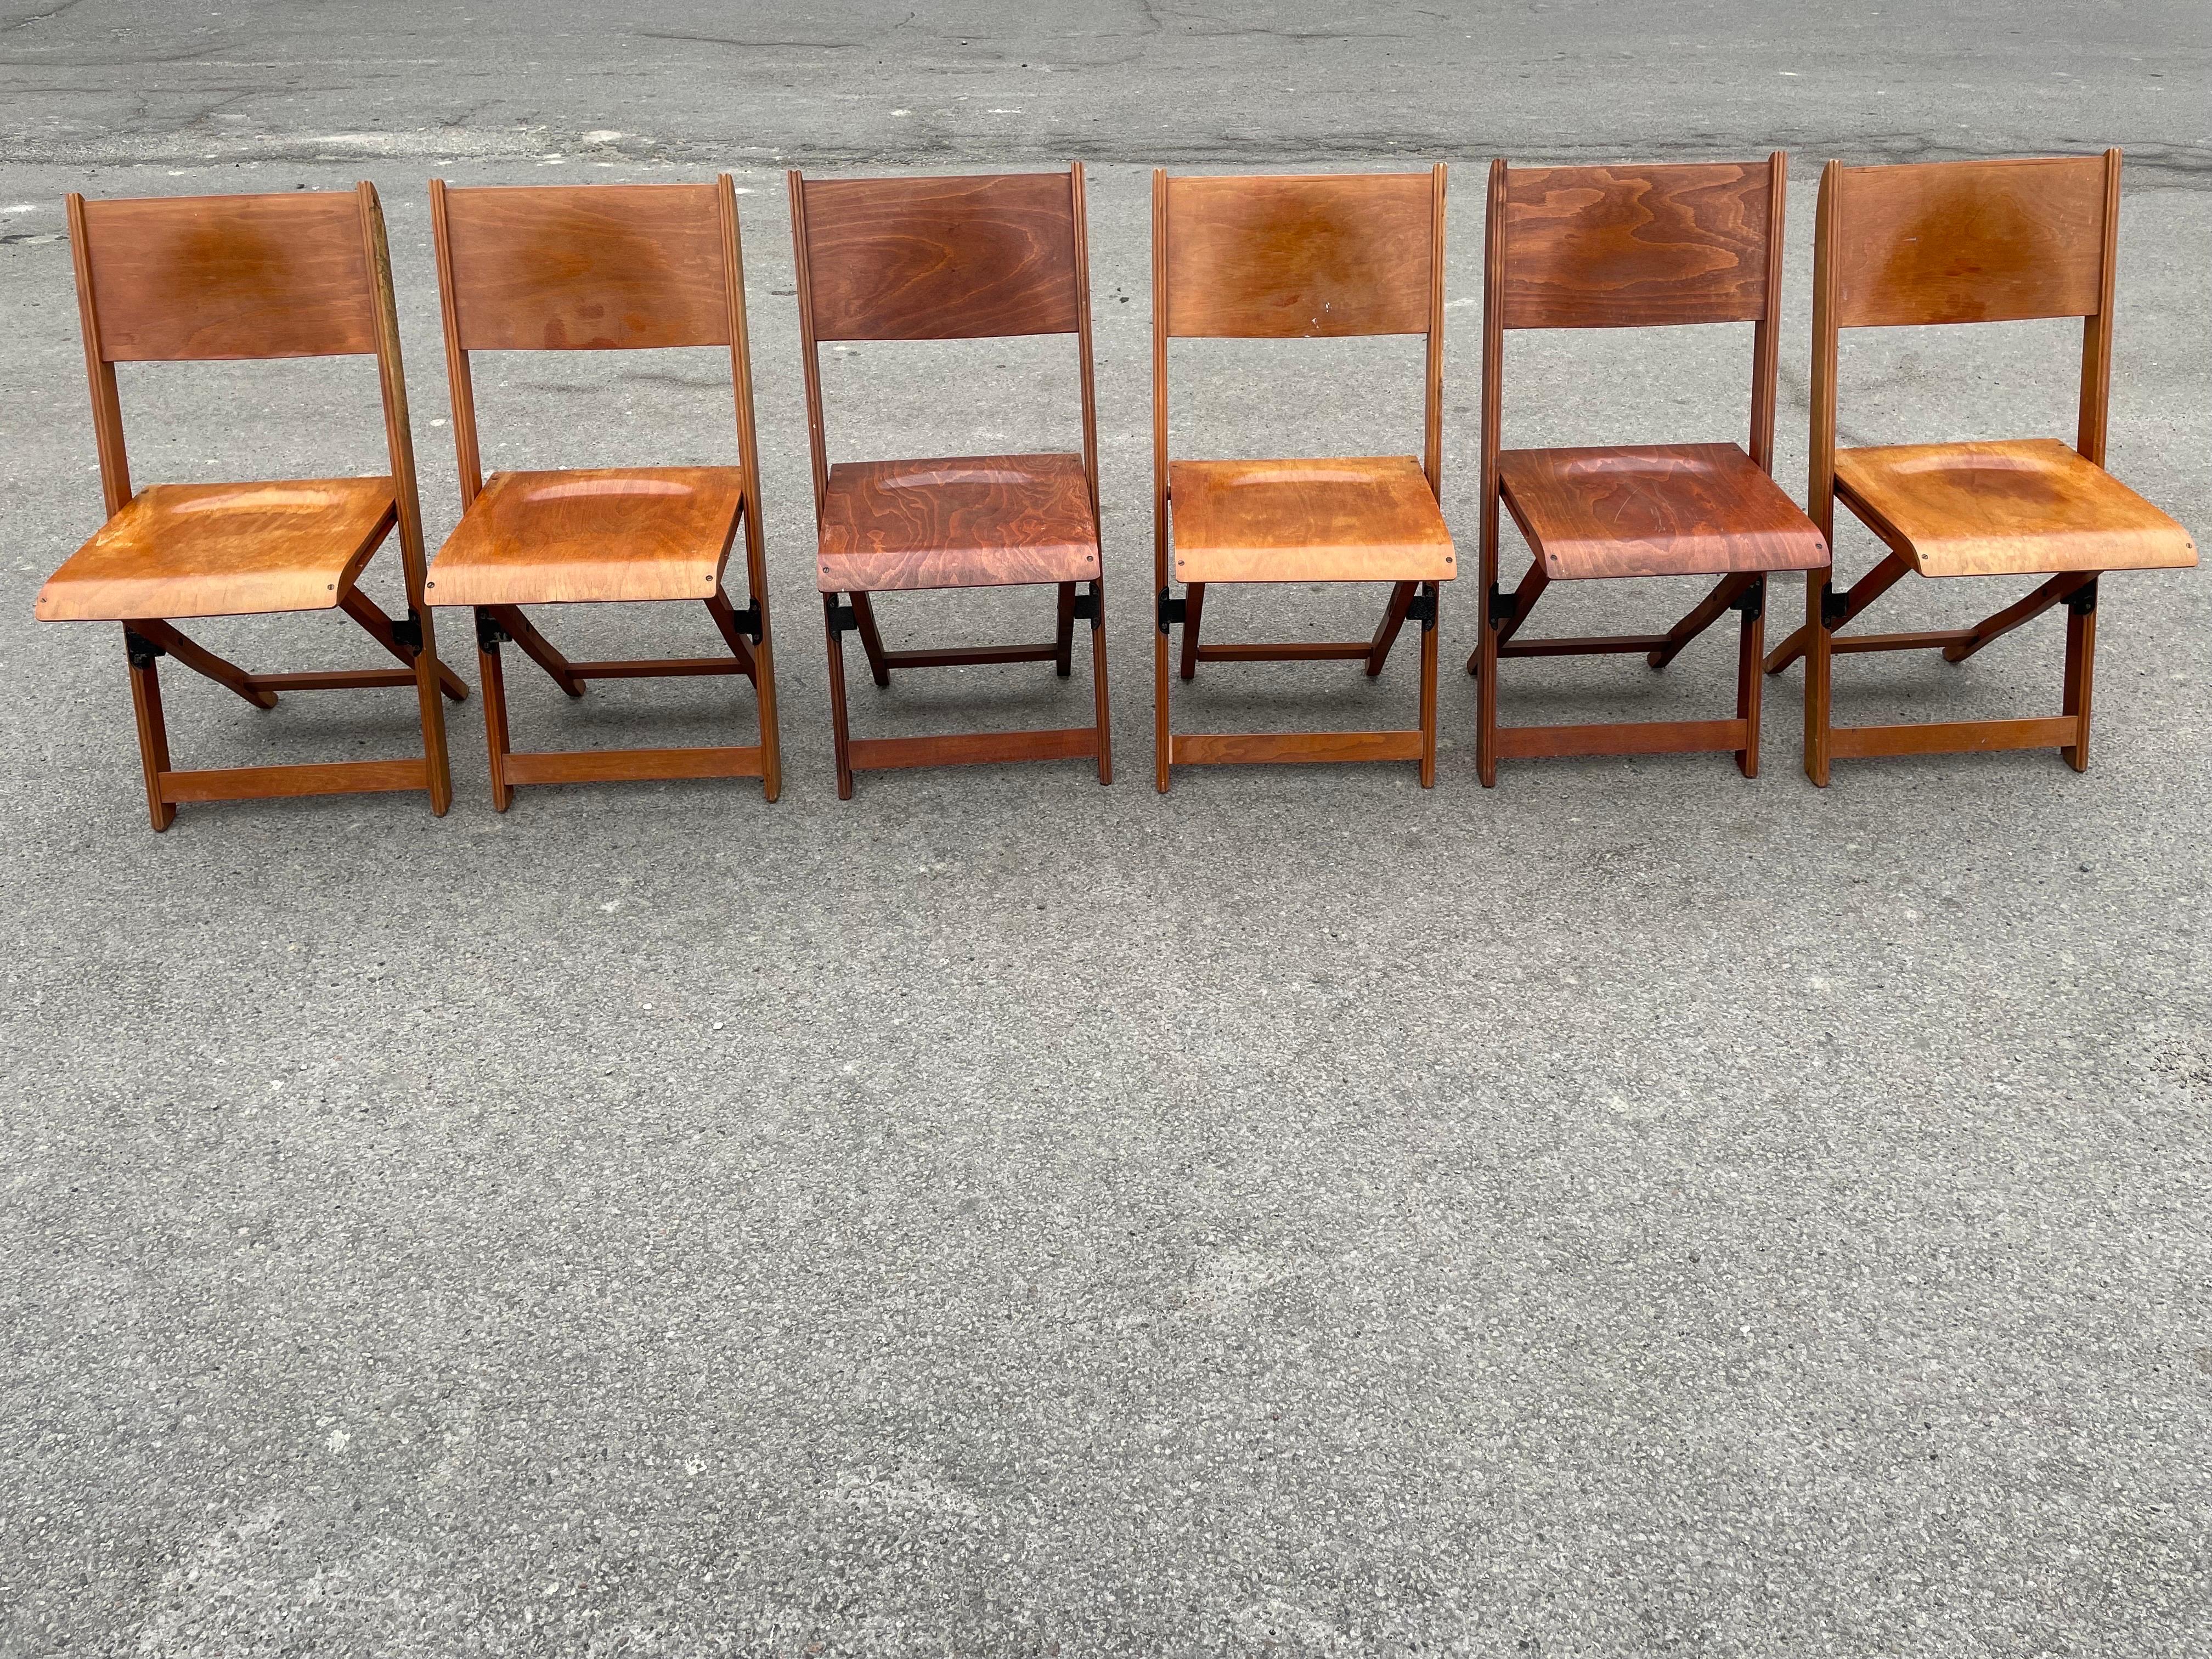 6 Danish foldable vintage chairs from the 1930s in a beautiful strong condition.